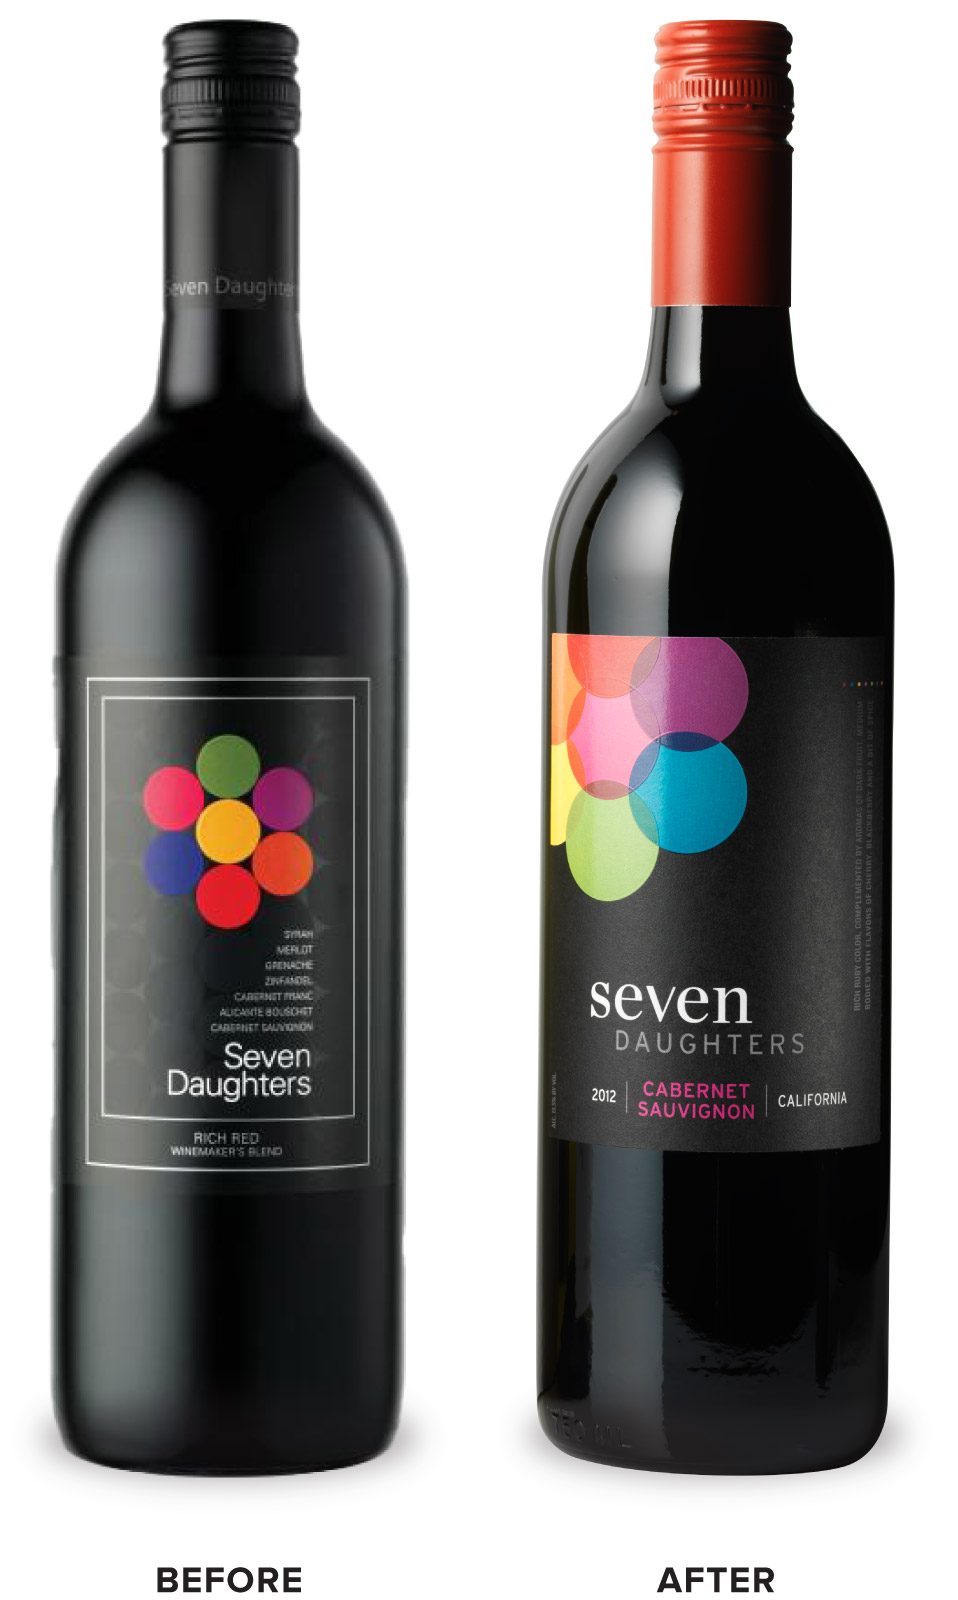 Seven Daughters Wine Packaging Before Redesign on Left & After on Right